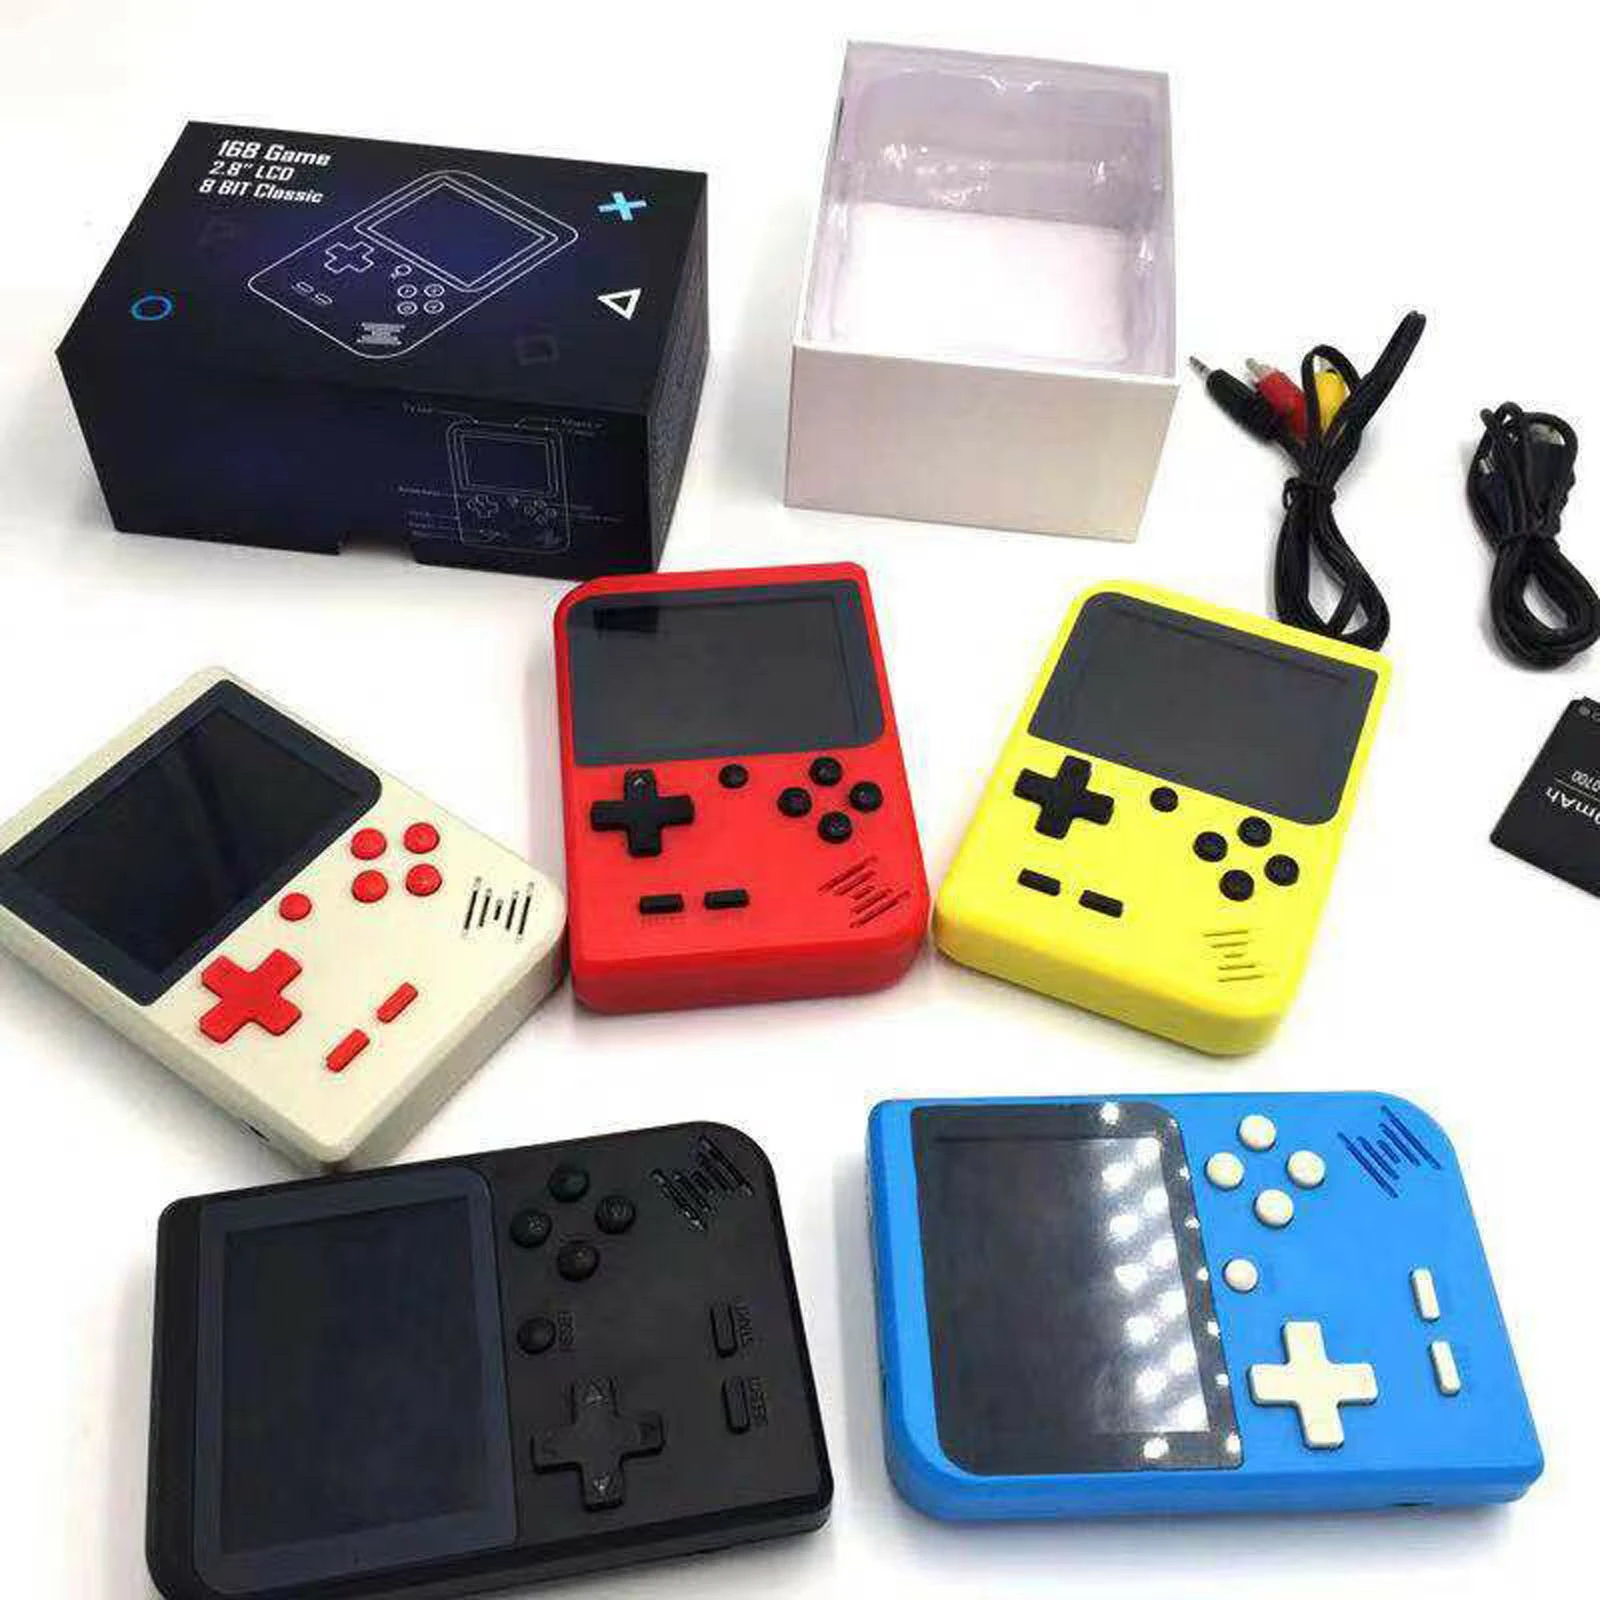 Cheap handheld game player built-in 168 classic retro games video game console